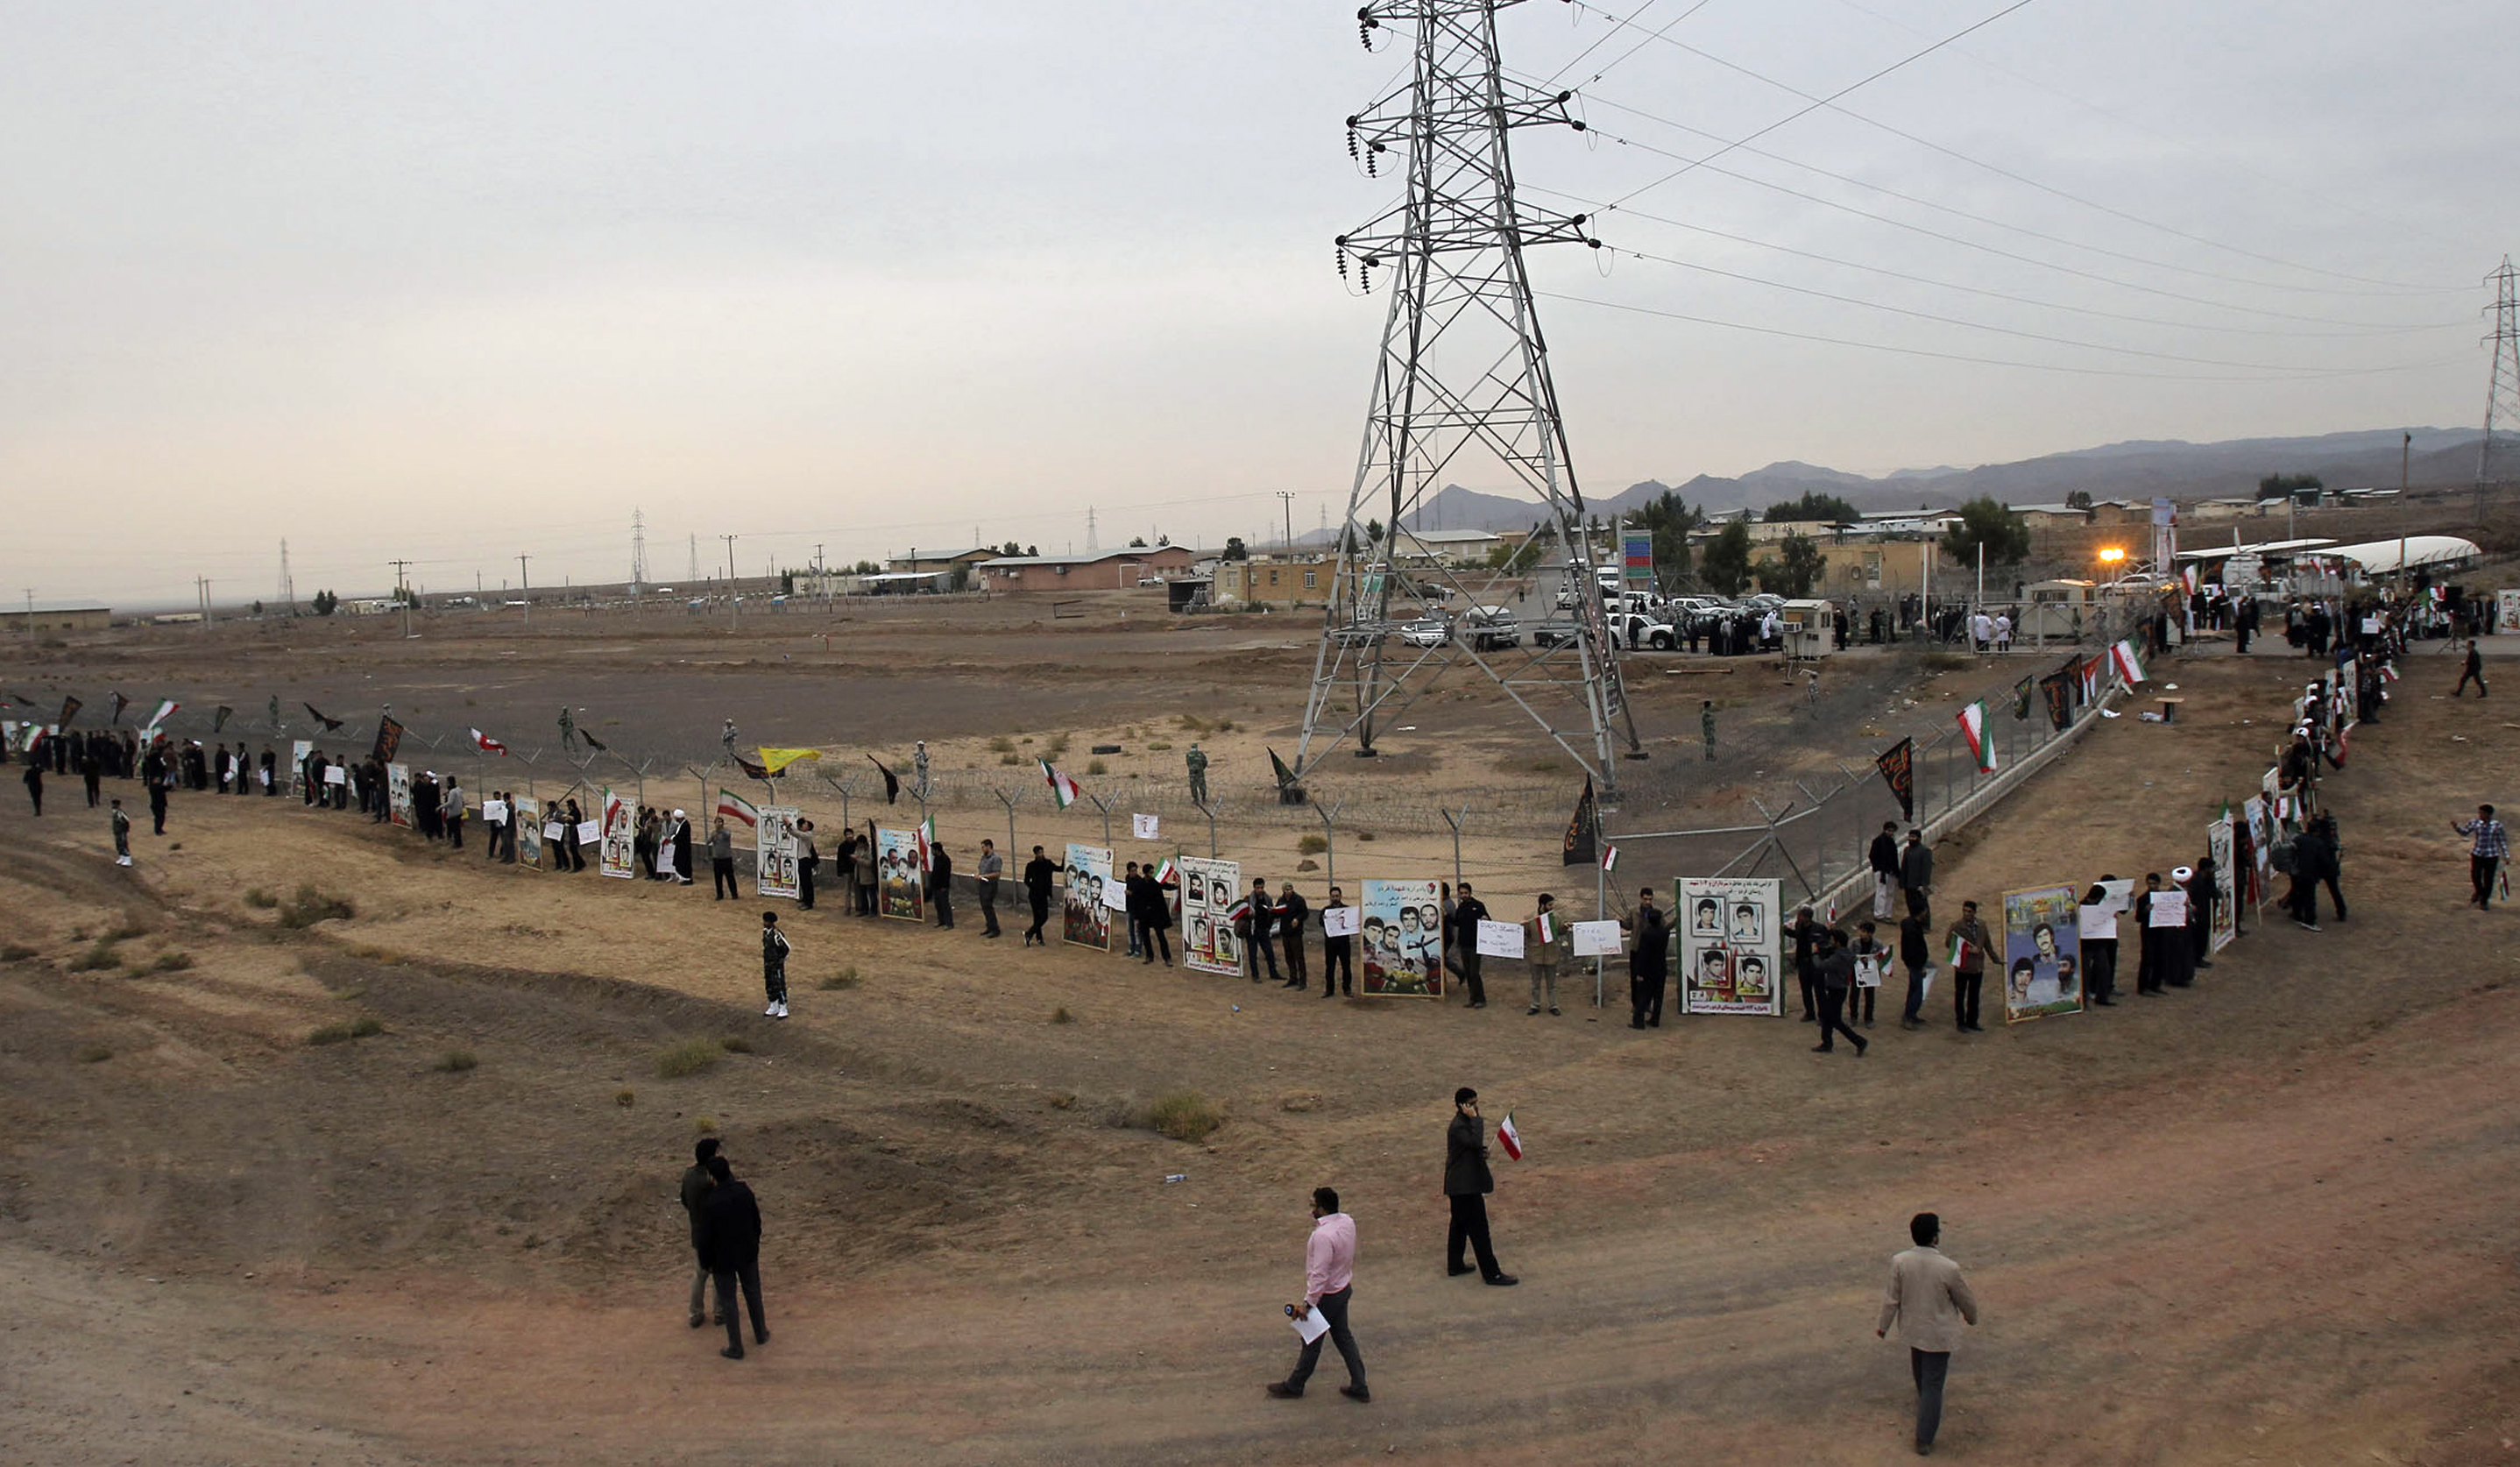 Iranian students formed a human chain to defend their country's nuclear program in 2013 outside the Fordow Uranium Conversion Facility in the northern part of the country. (CHAVOSH HOMAVANDI / AFP / Getty Images)